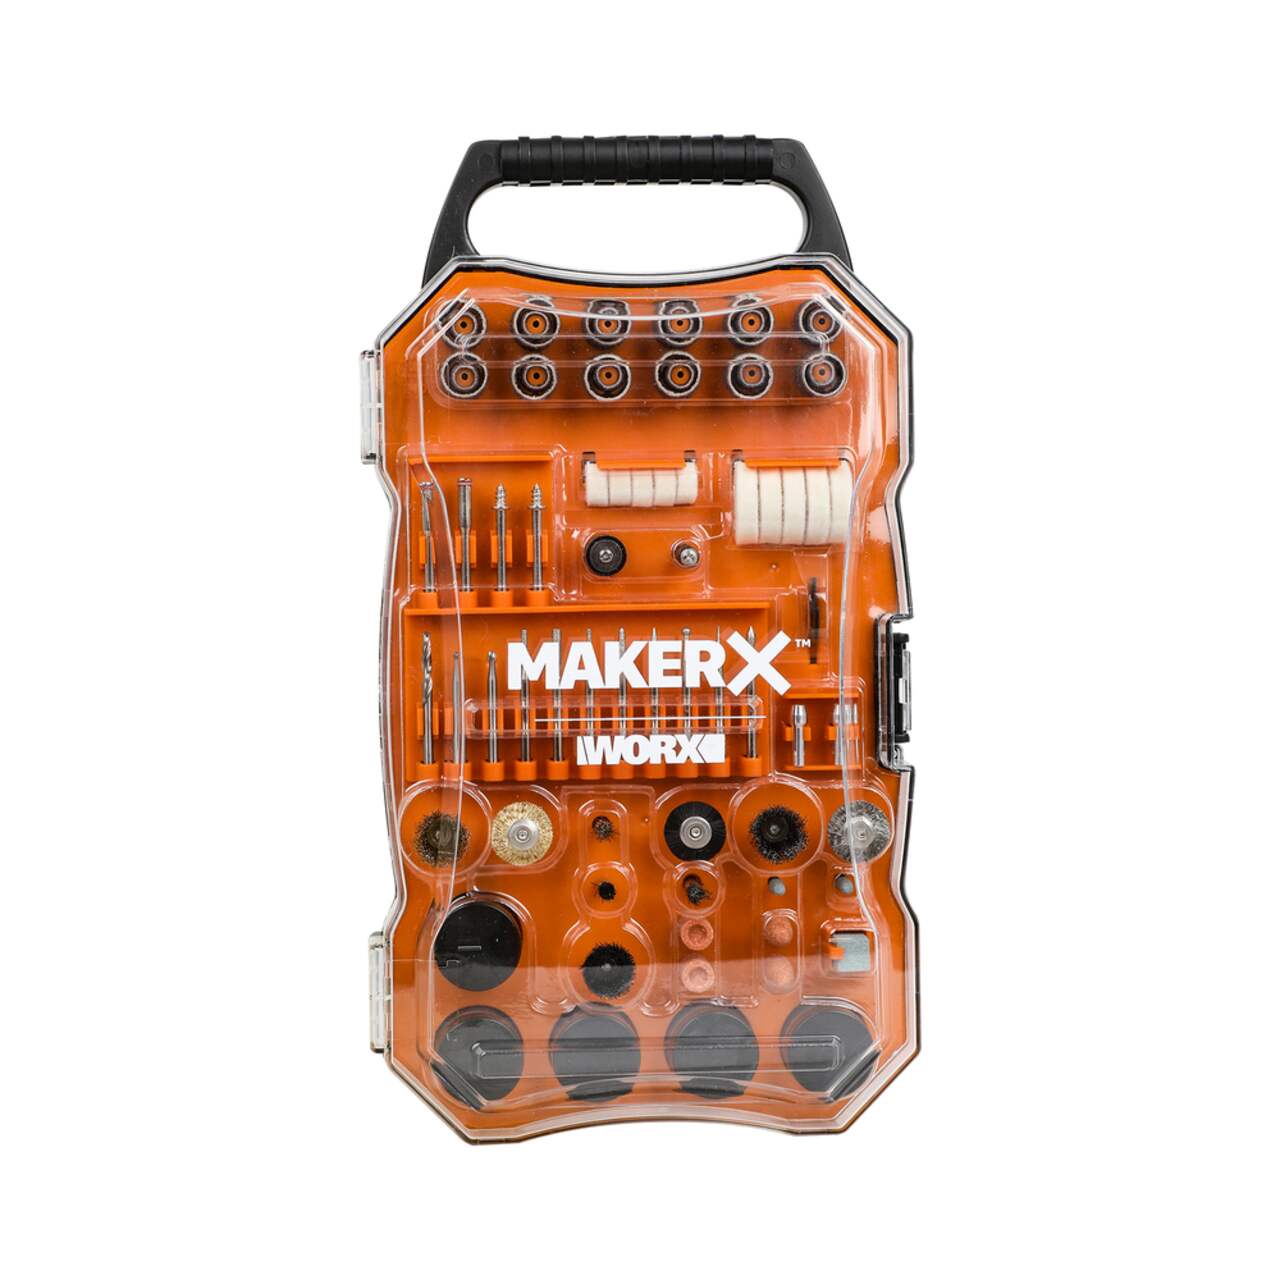 https://media-www.canadiantire.ca/product/fixing/tools/portable-power-tools/7744344/worx-makerx-rot-ac-cbb9a88f-2e53-4f7f-8e63-b05873cdc4d1.png?imdensity=1&imwidth=640&impolicy=mZoom